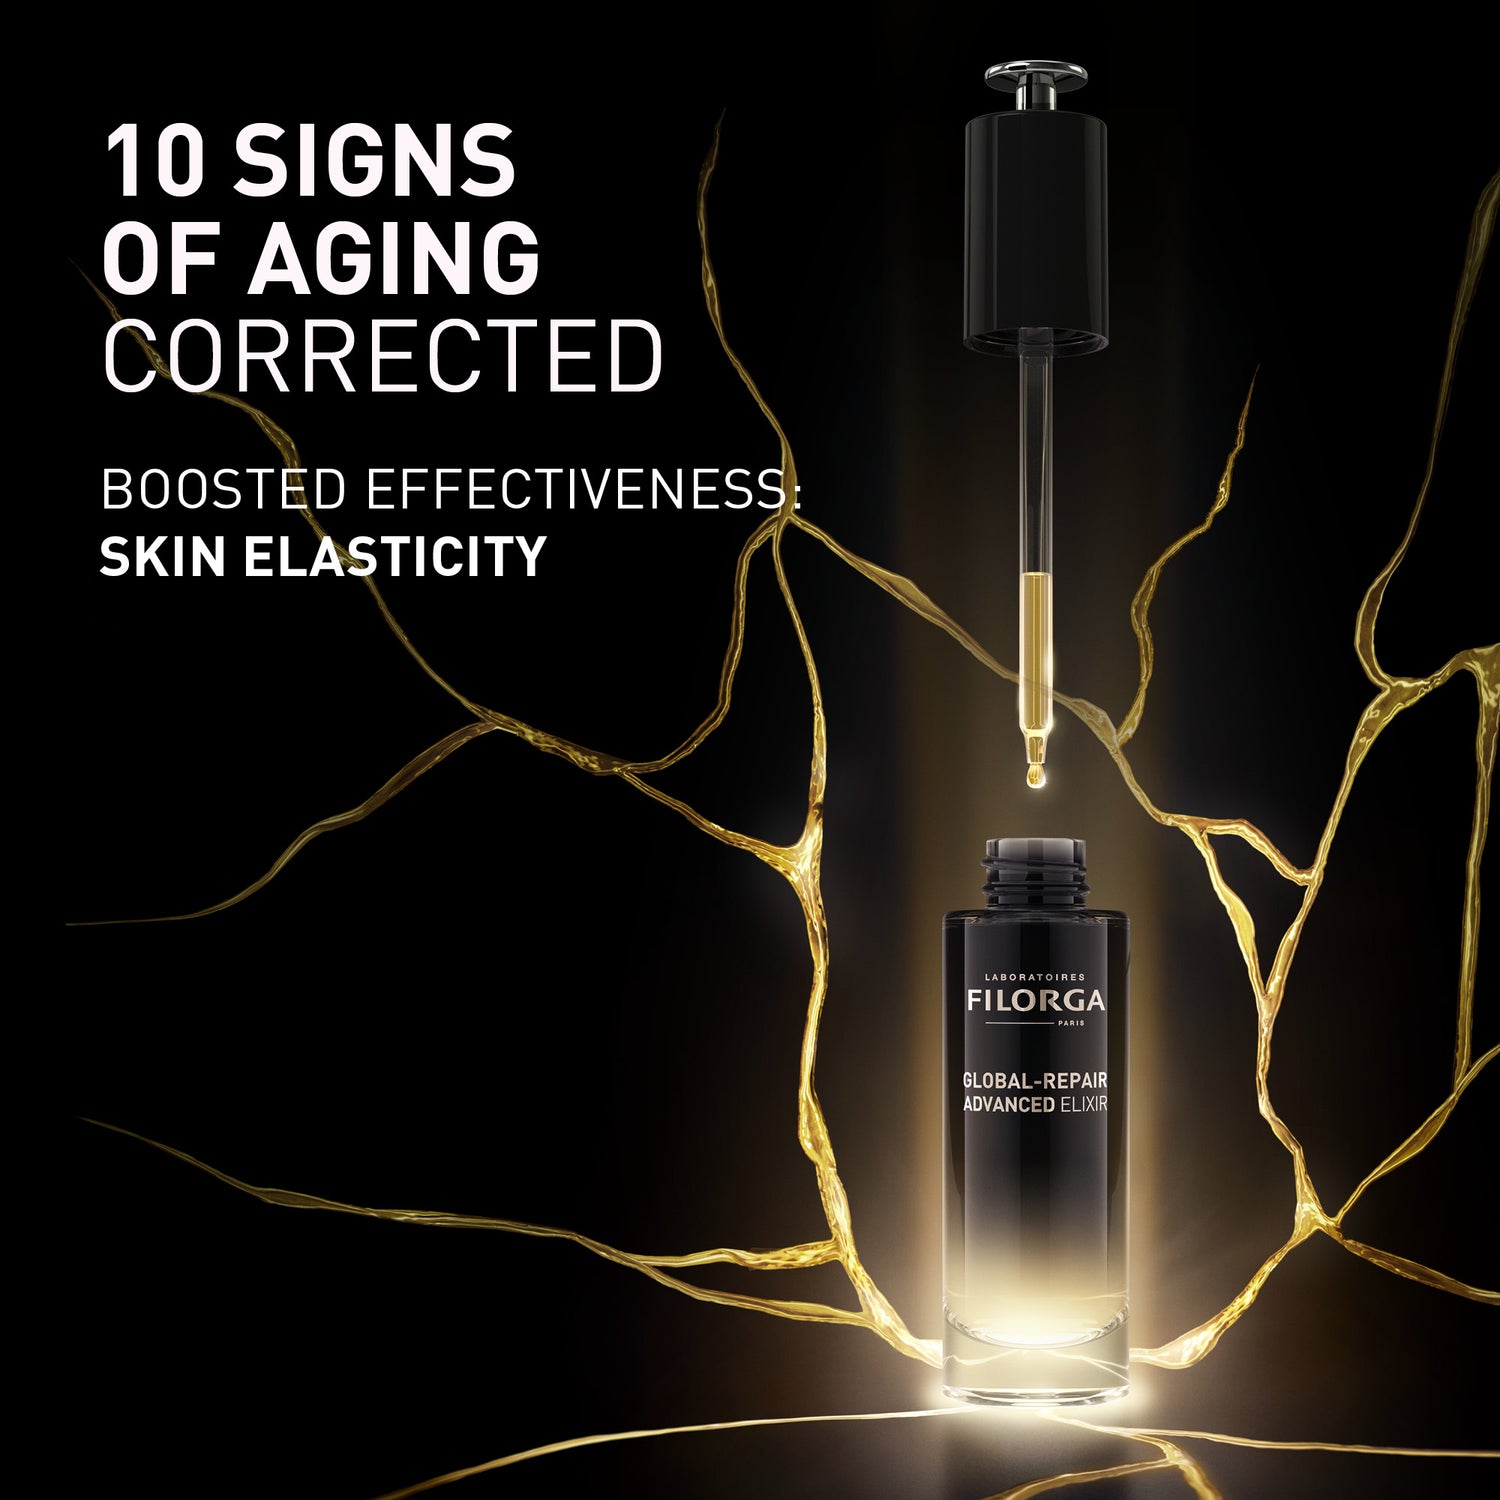 10 Signs of Aging Corrected, boosted effectiveness, skin elasticity with FILORGA GLOBAL-REPAIR ADVANCED ELIXIR open glass bottle with pipette